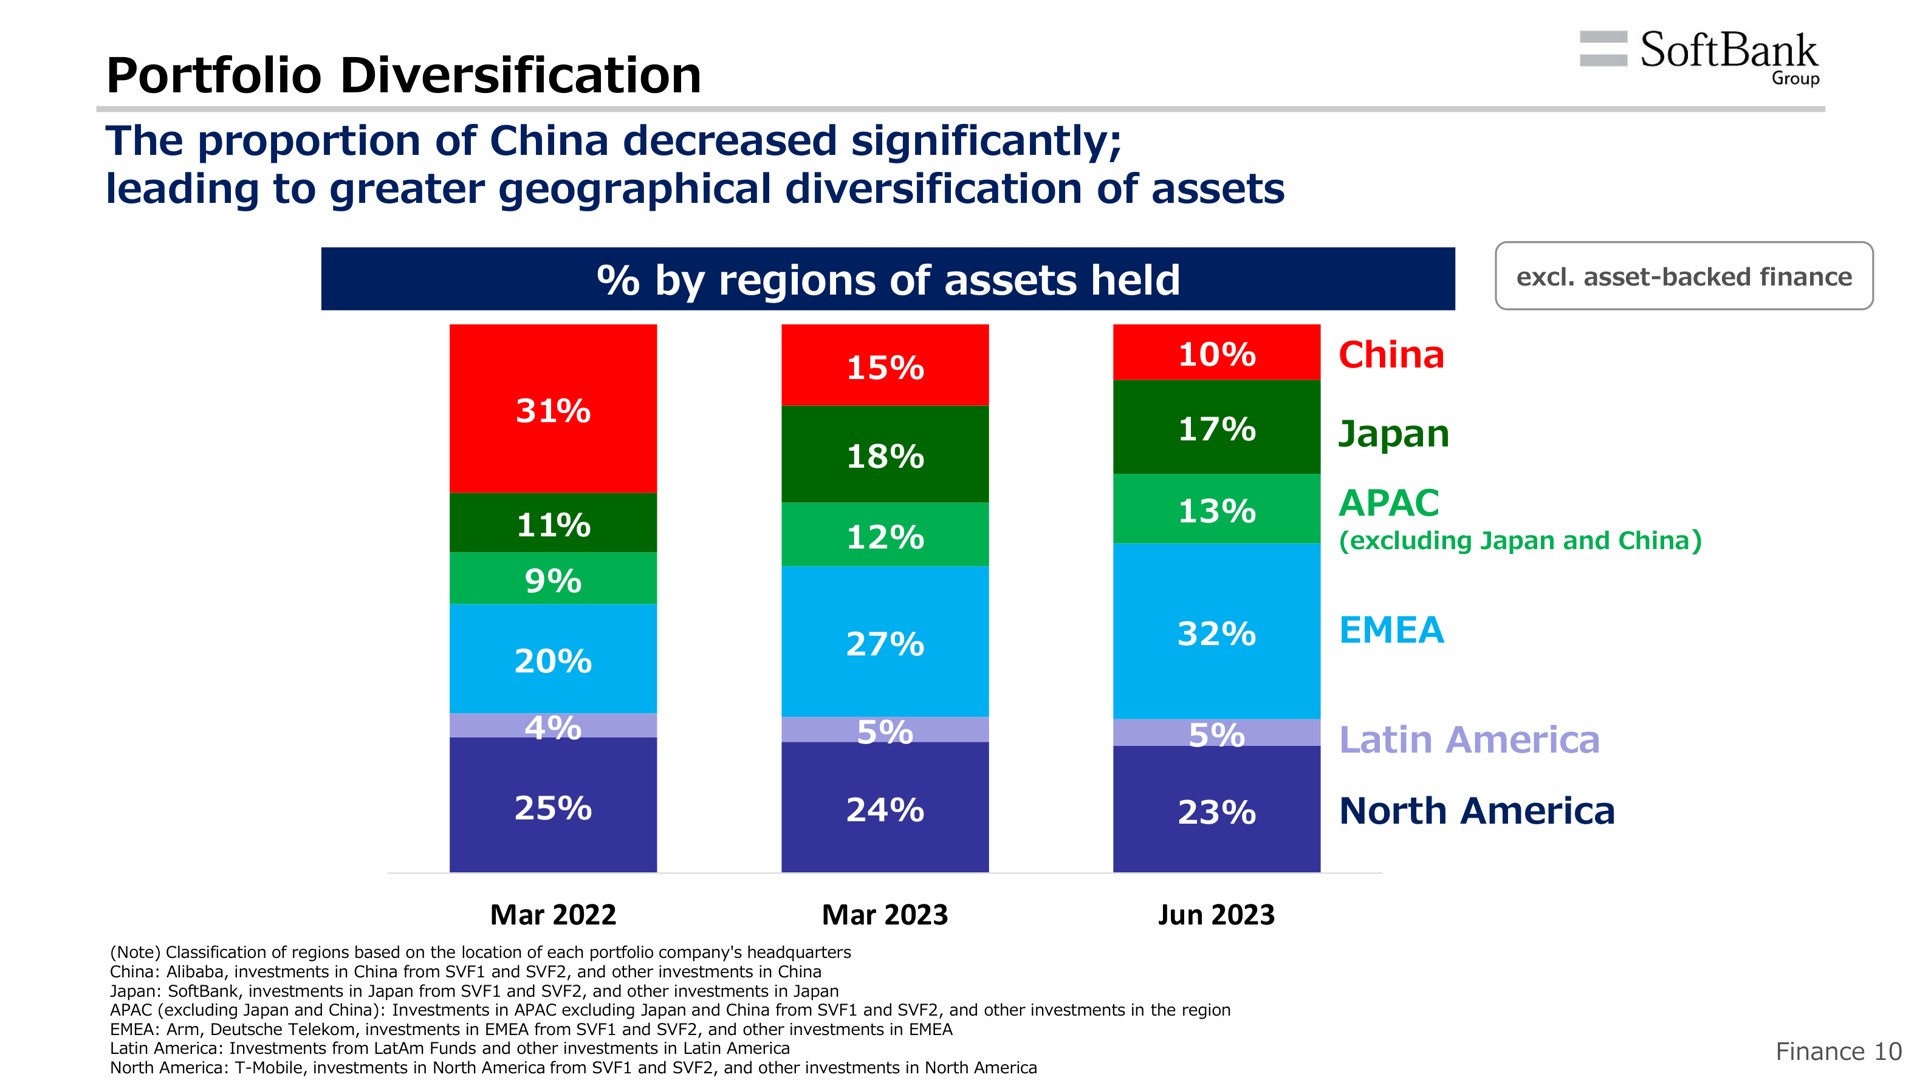 portfolio diversification the proportion of china decreased significantly leading to greater geographical diversification of assets by regions of assets held | SoftBank